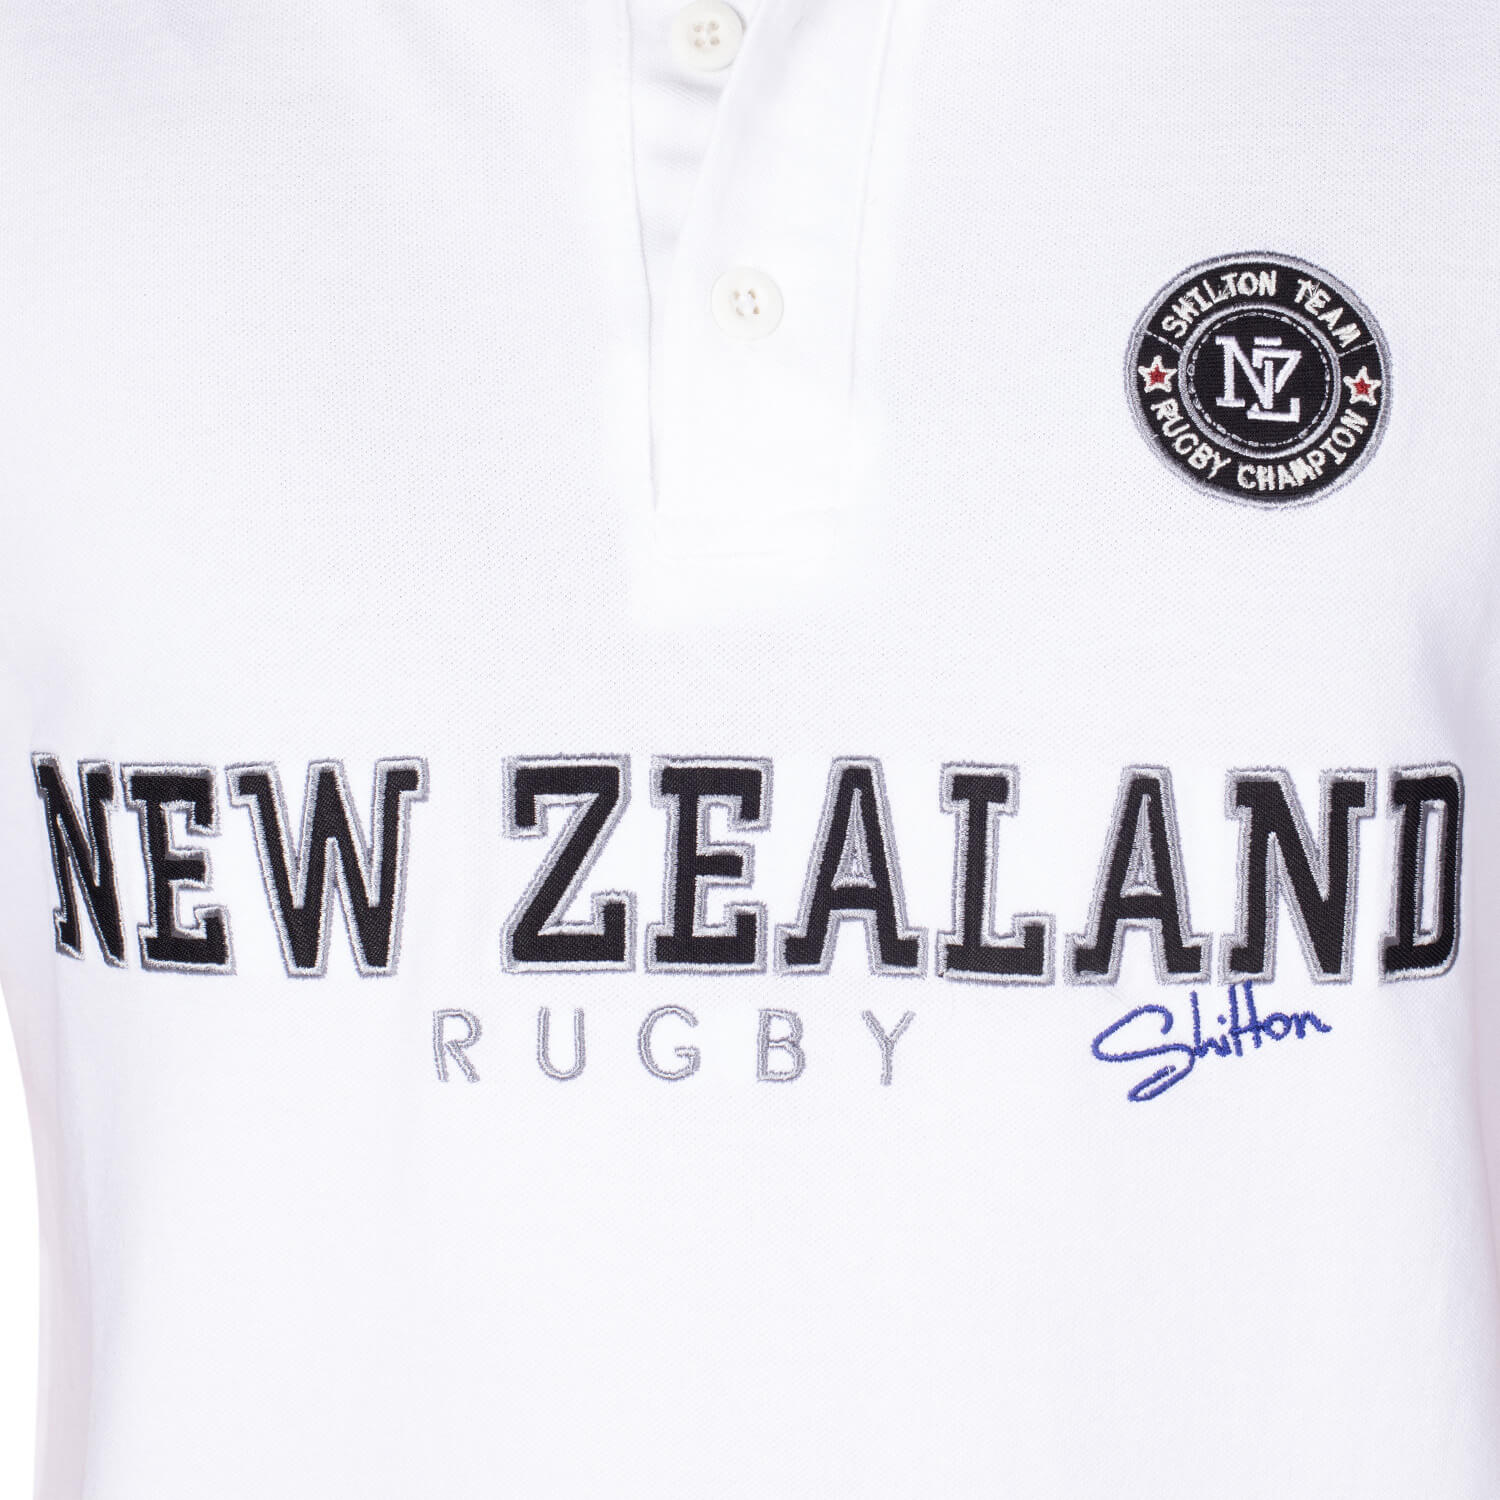 Polo rugby New Zealand